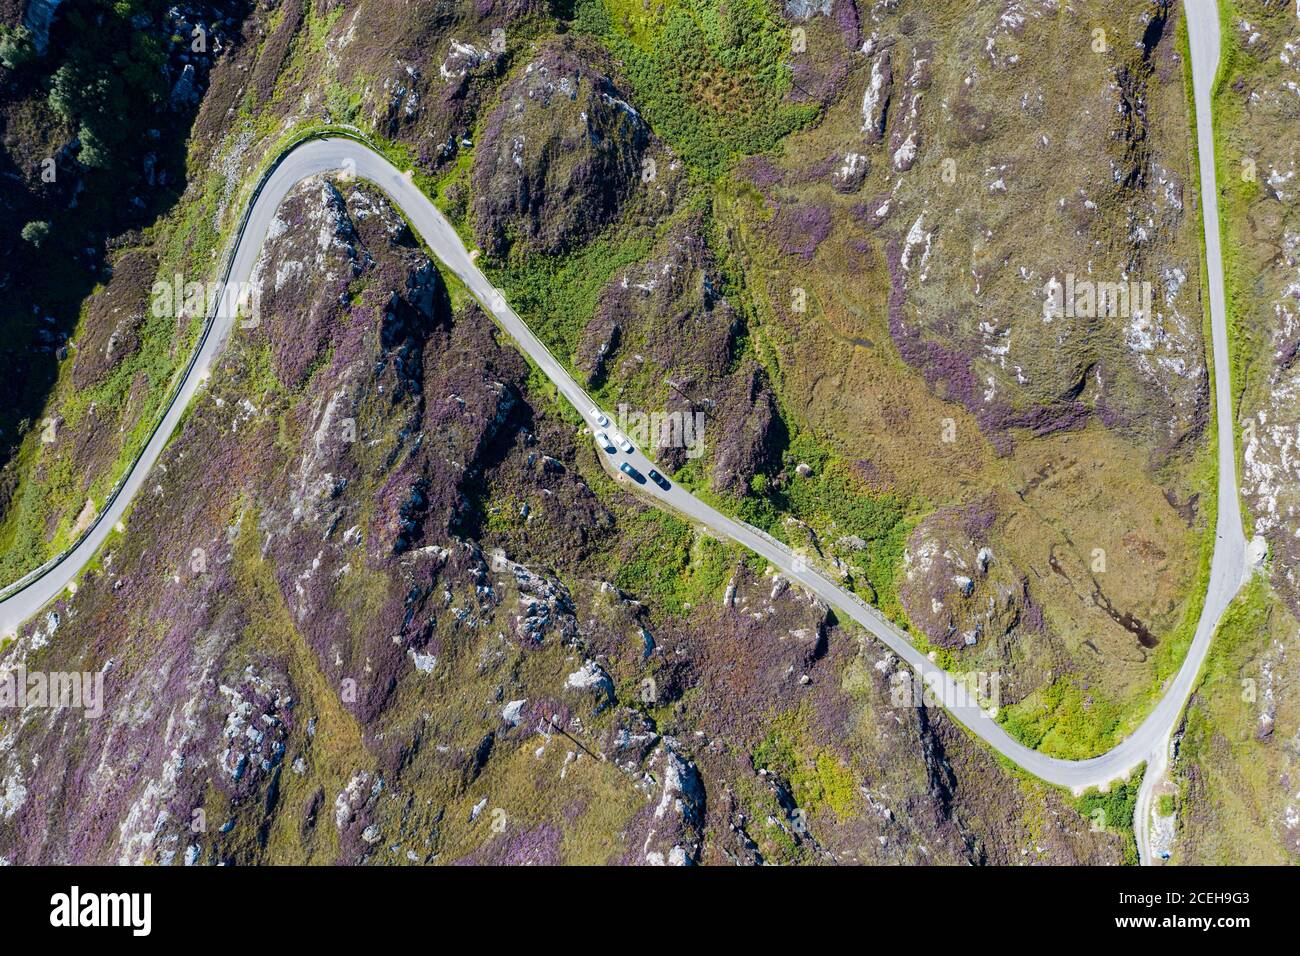 Aerial view of single track road on North Coast 500 tourist route near Clachtoll in Sutherland, Scotland UK Stock Photo